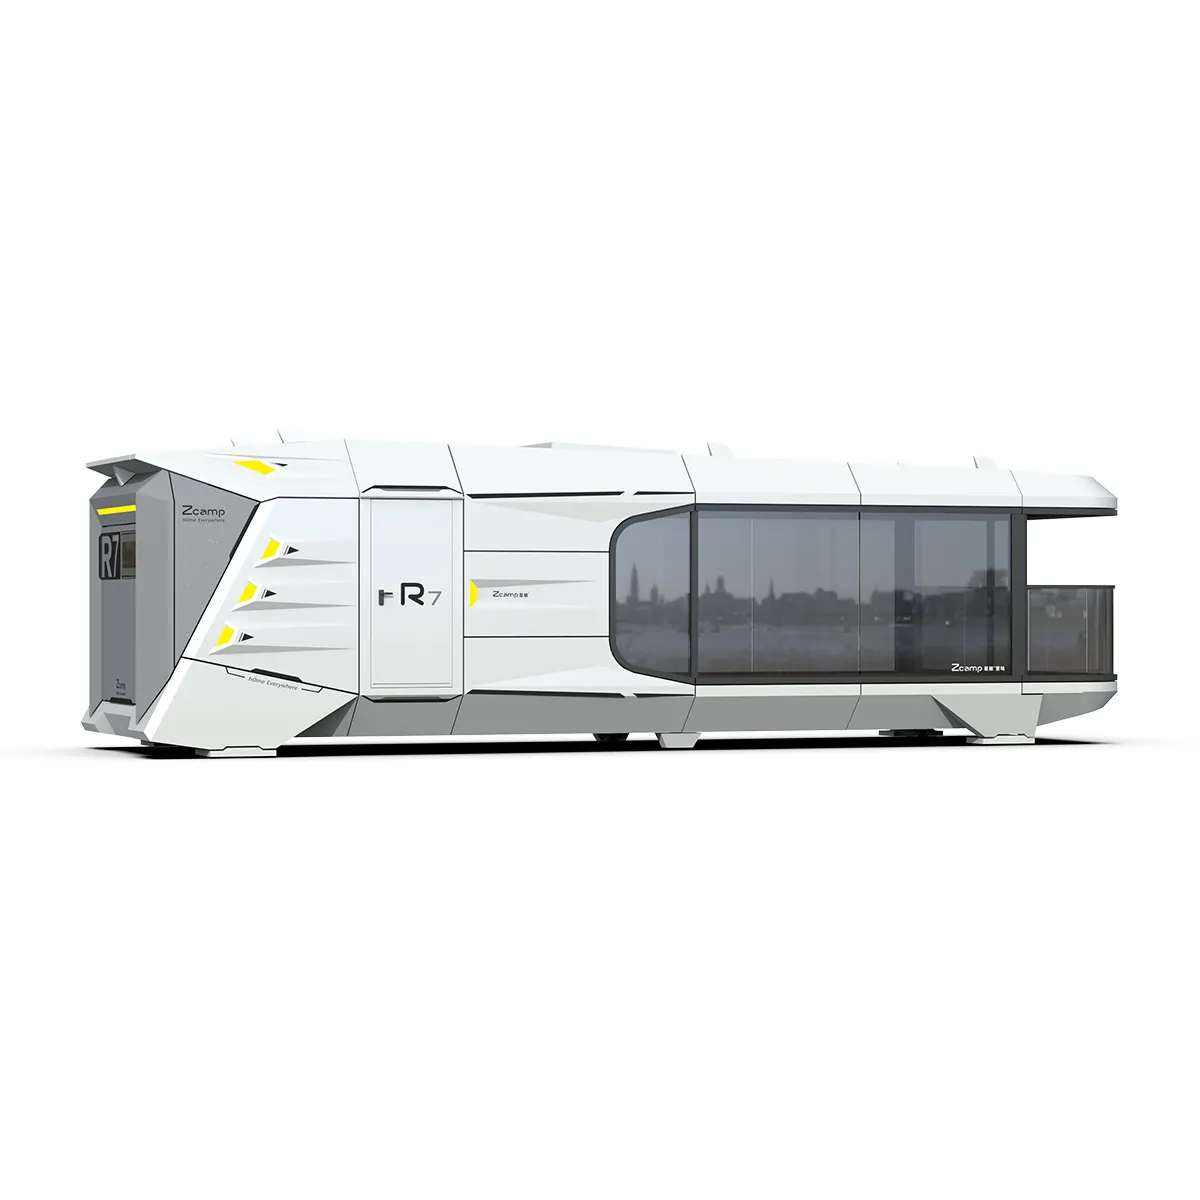 Zcamp R7 Extendable High End Life Living Mobile Container Hotel Prefabricated Futuristic Capsule House Touring Car Prefab House